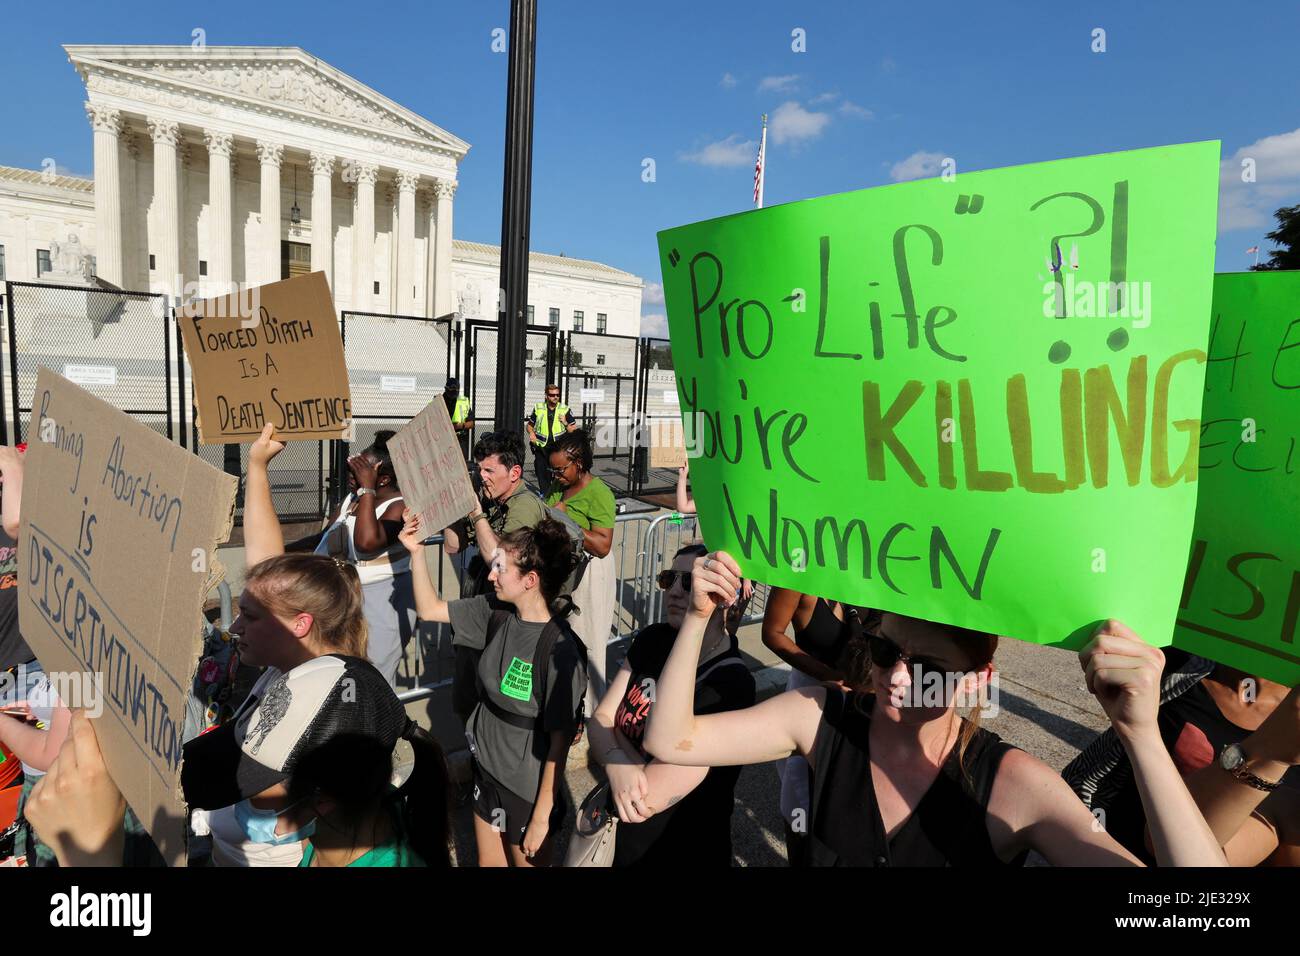 Abortion rights demonstrators protest outside the United States Supreme Court as the court rules in the Dobbs v Women's Health Organization abortion case, overturning the landmark Roe v Wade abortion decision, in Washington, DC, U.S., June 24, 2022. REUTERS/Jim Bourg Stock Photo